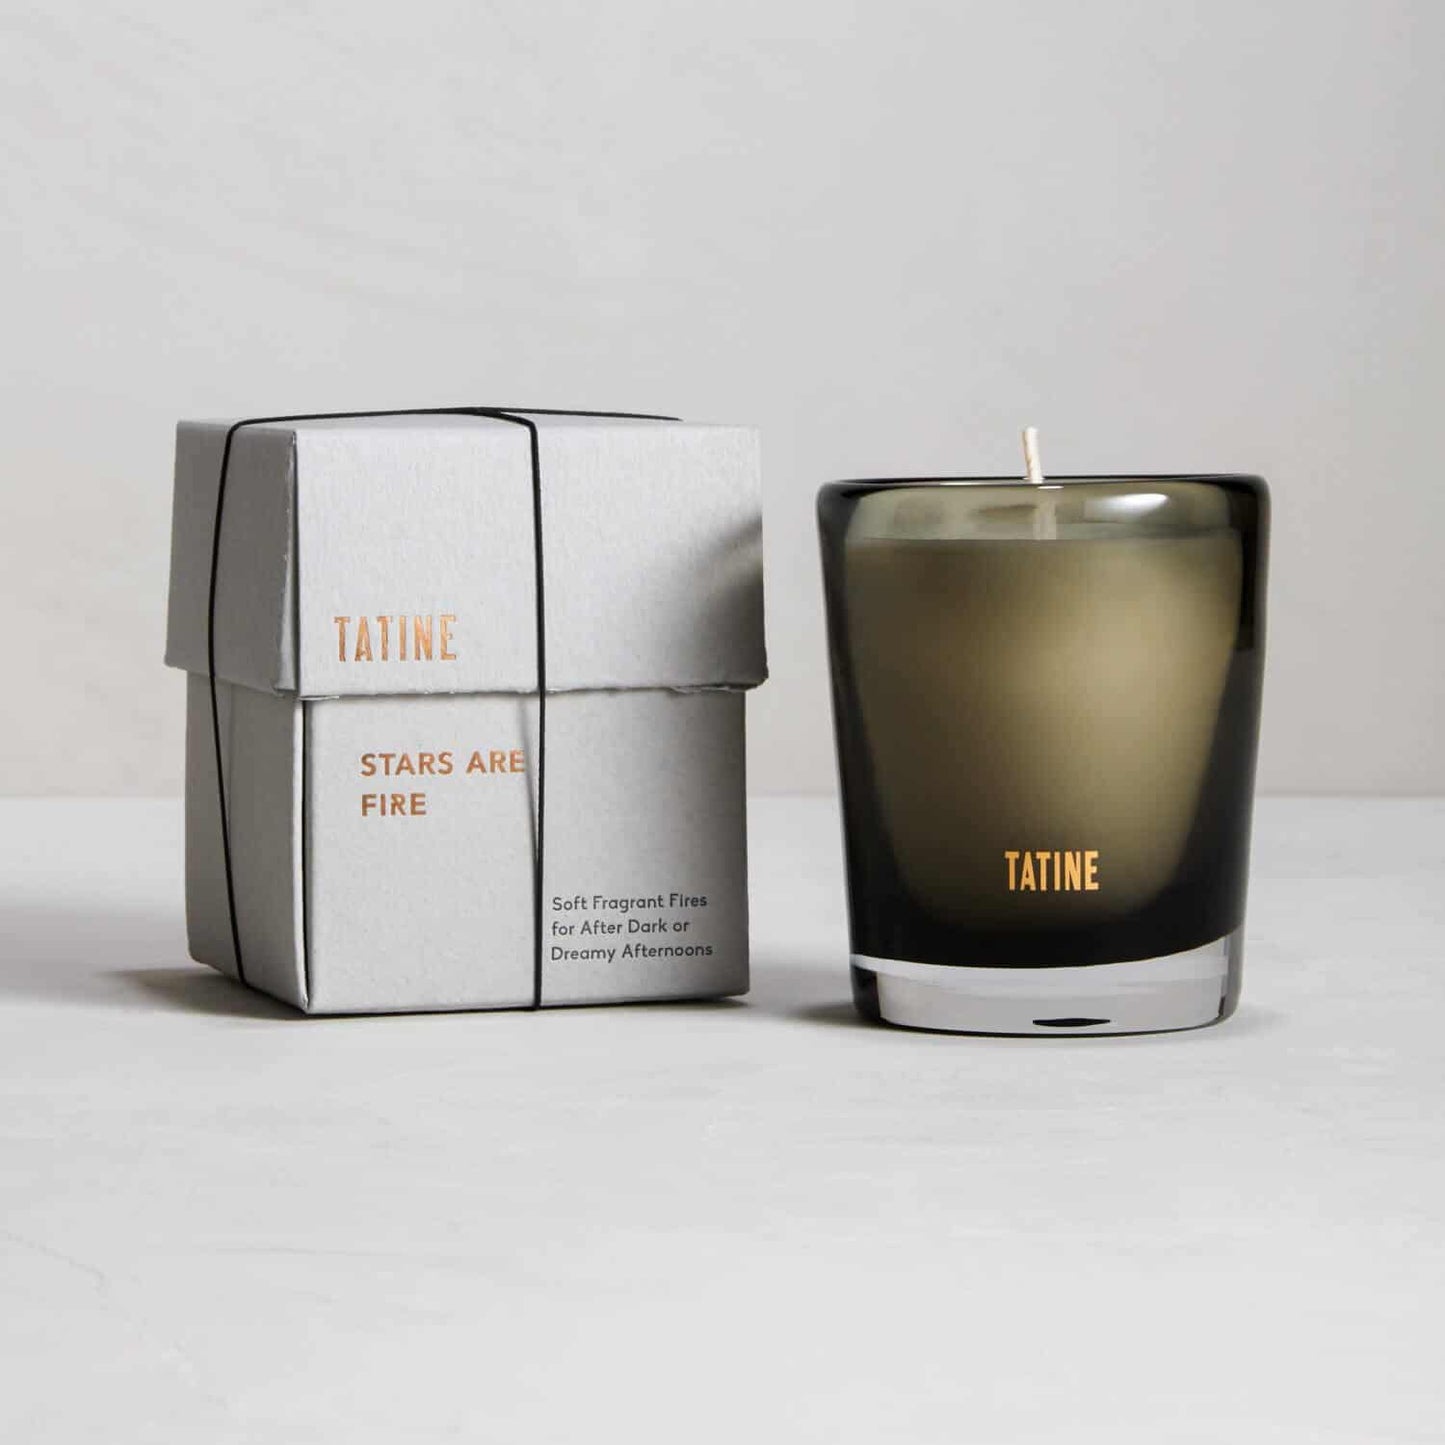 Sanctuary Scented Candle by Tatine